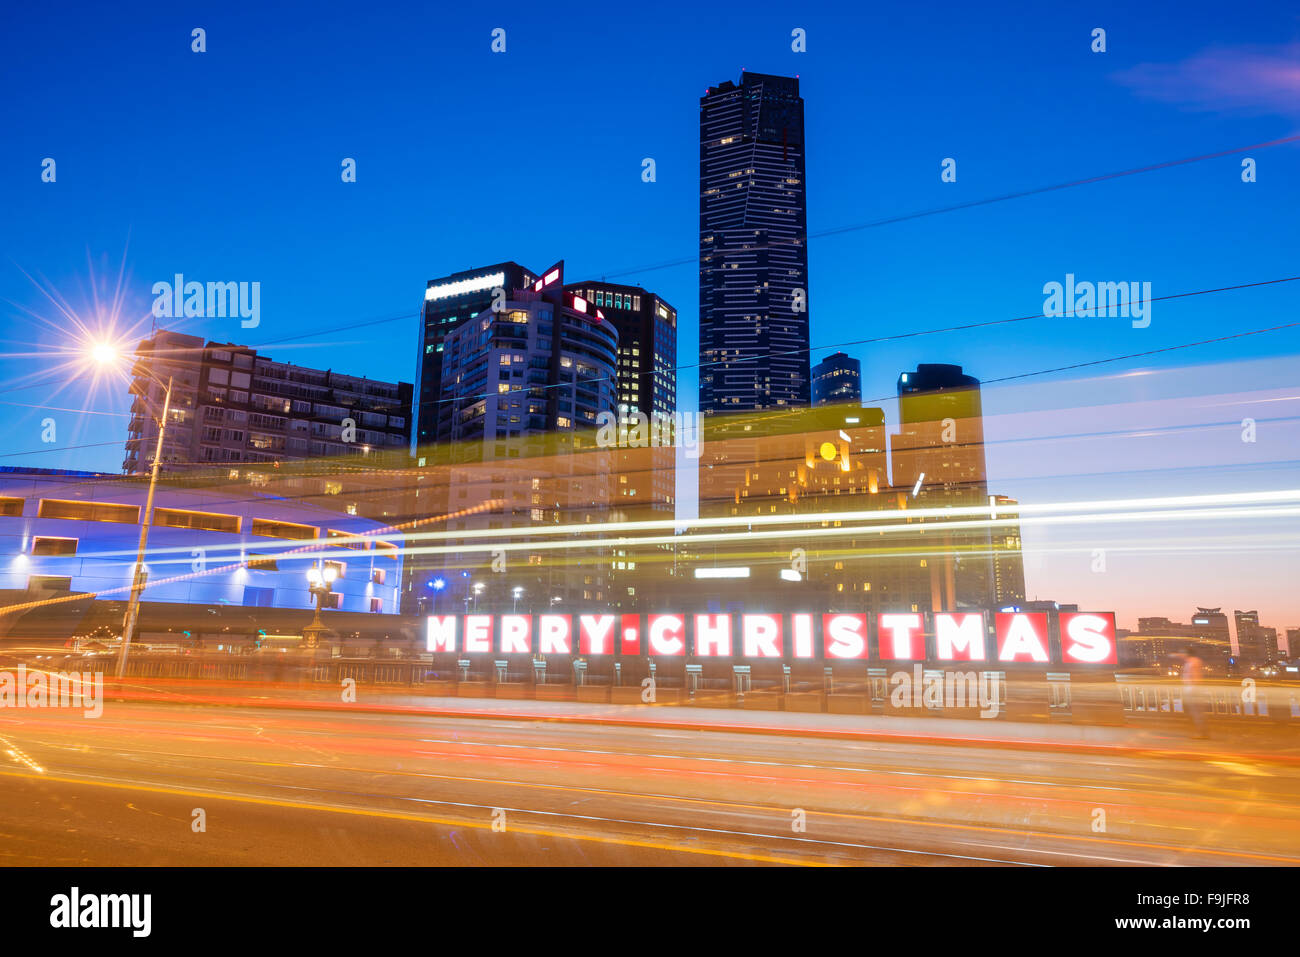 Merry Christmas sign in a city Stock Photo